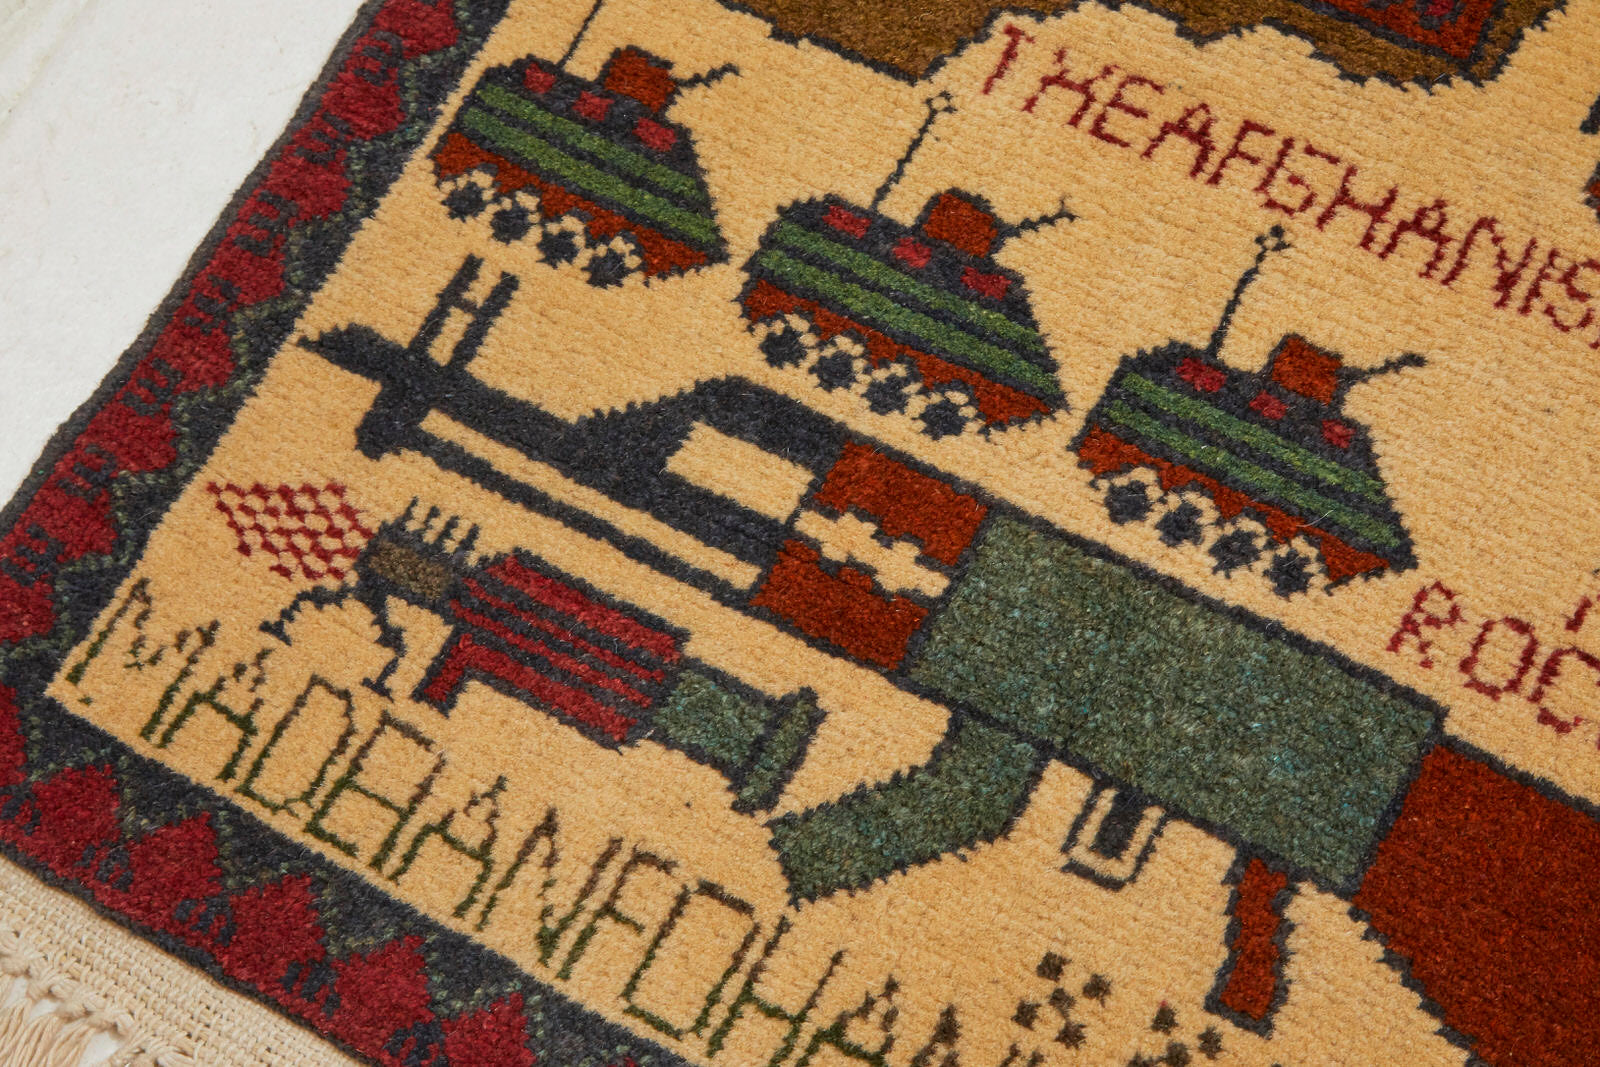 Hand woven Afghan war rug with map images, tanks, weapons and the words "Pakistan," "2015," "Made in Afghanistan" with cream background and red, brown and blue images - Available from King Kennedy Rugs Los Angeles